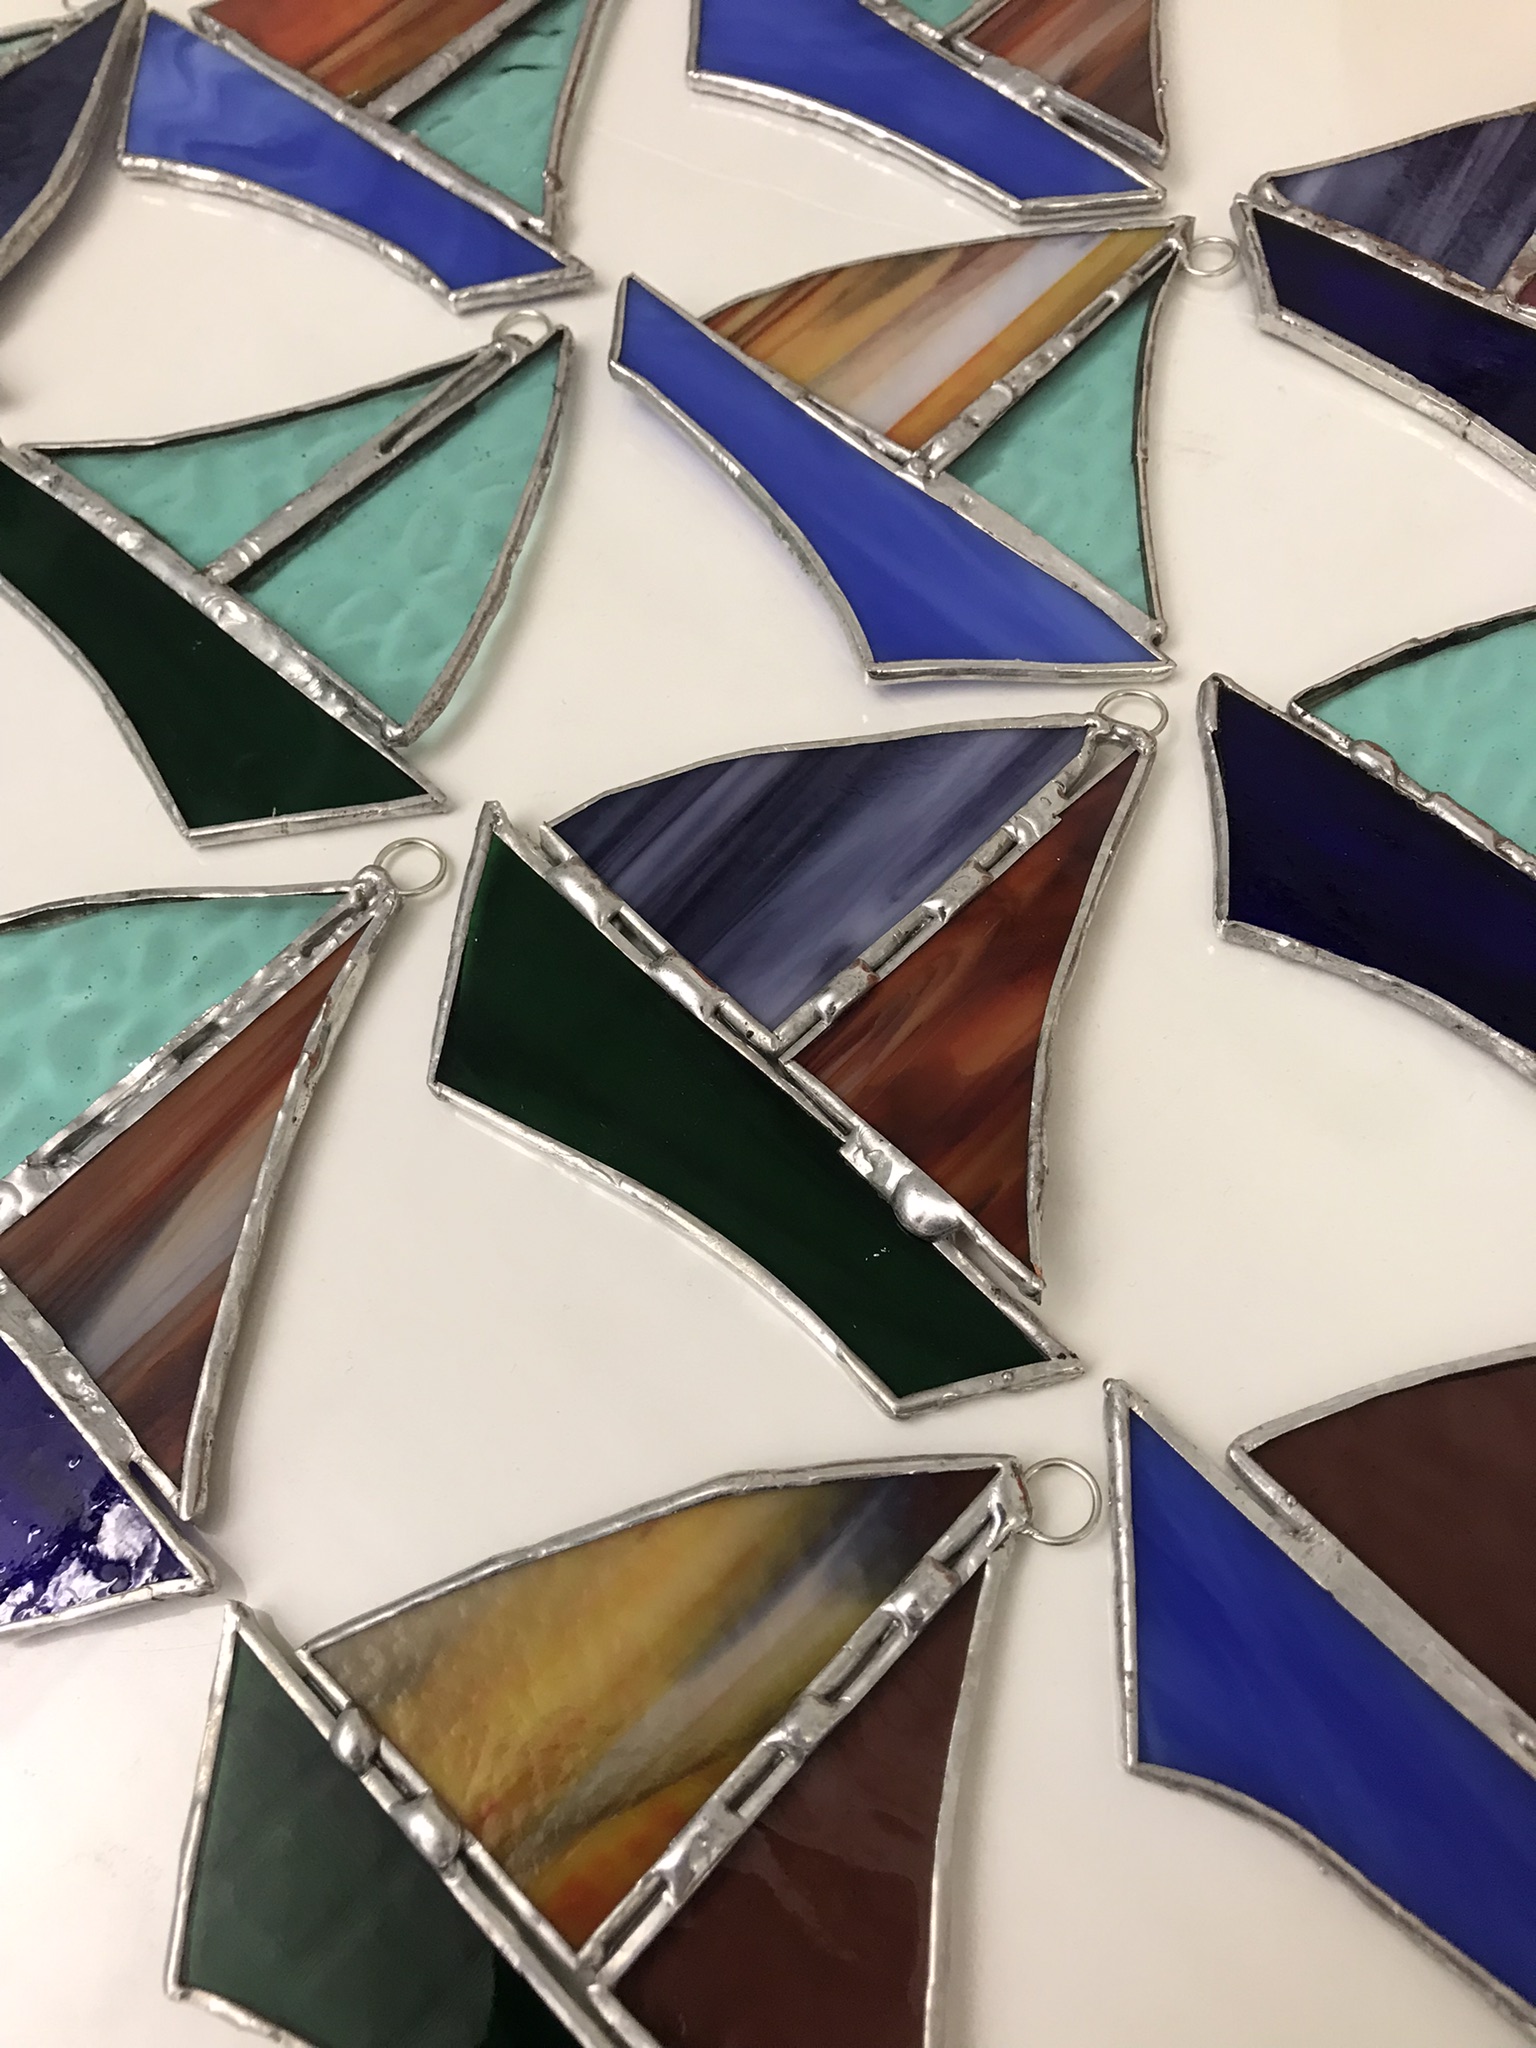 stained glass sailboats